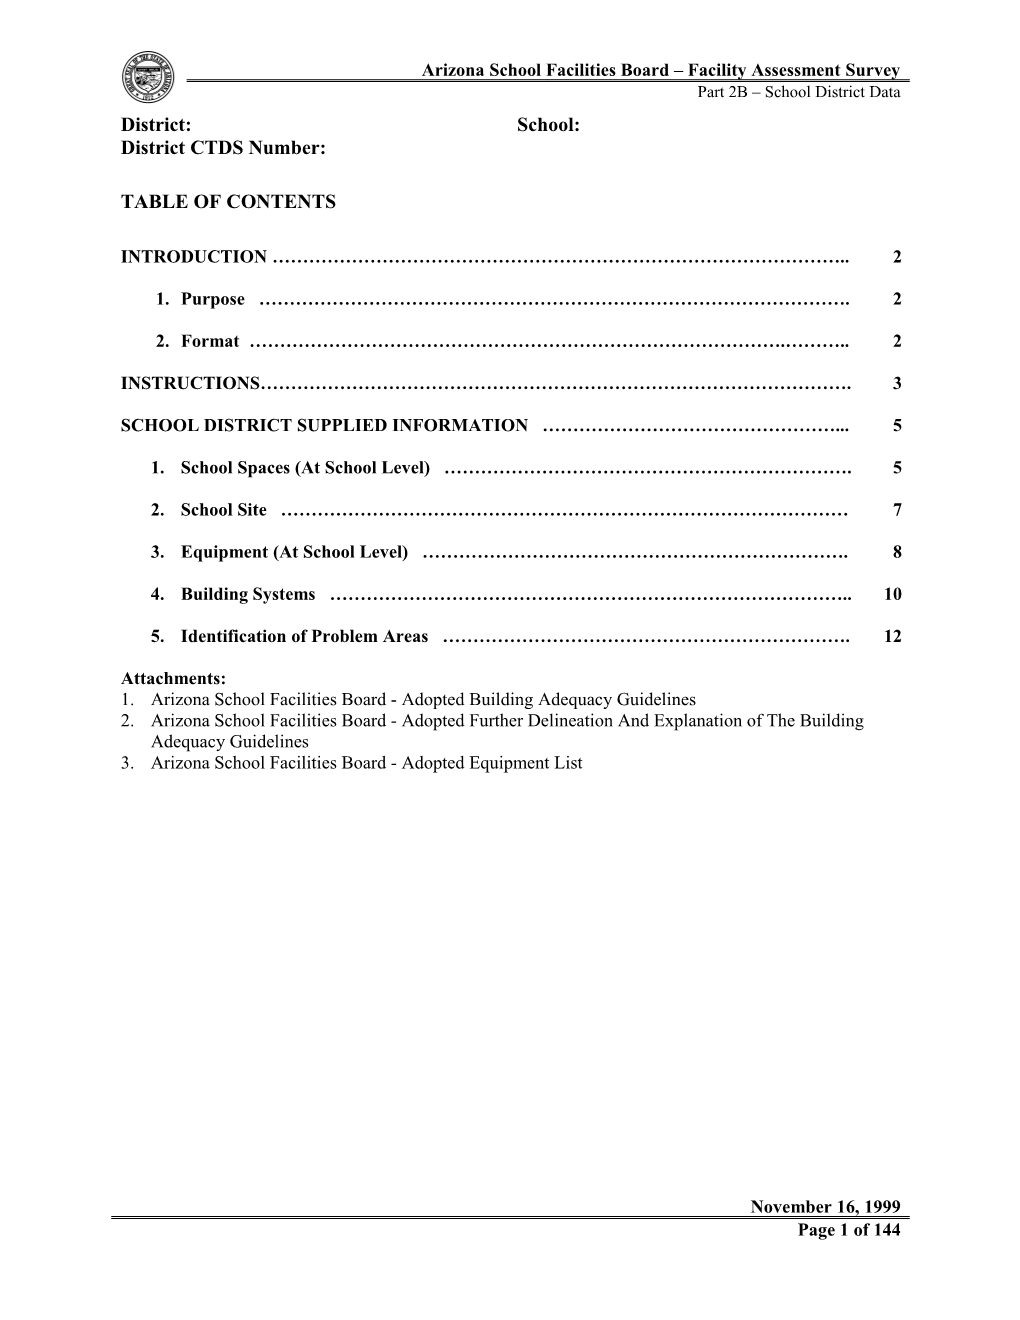 Table of Contents s113